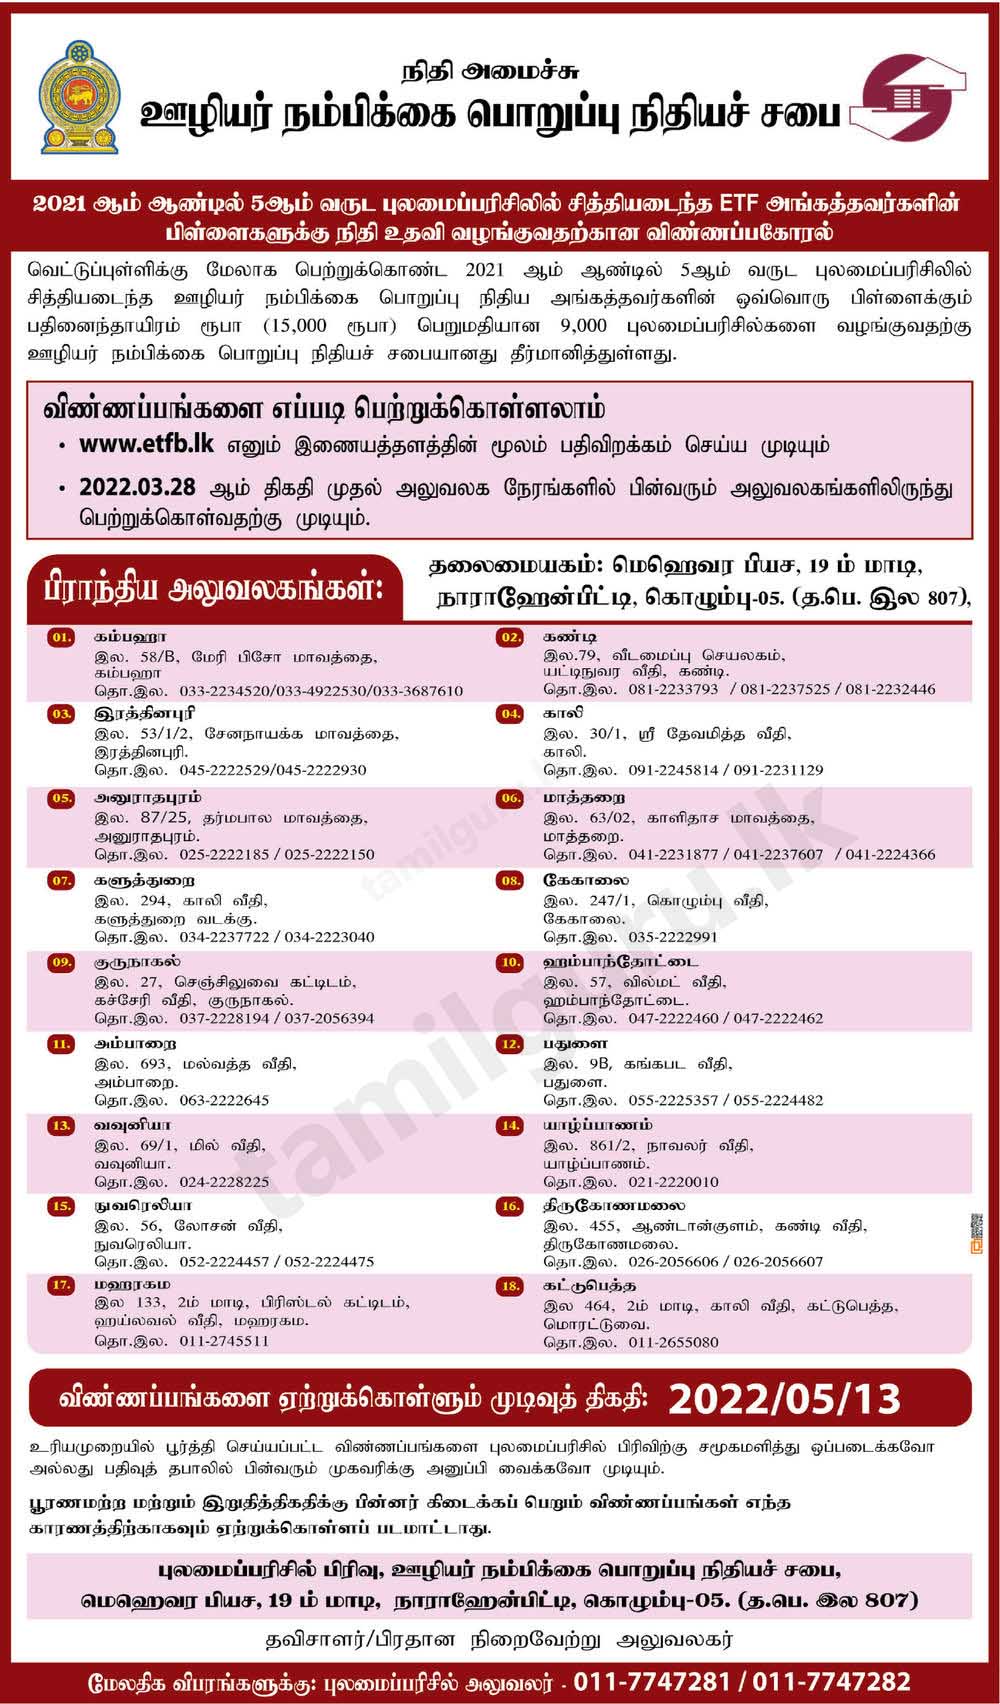 Scholarship Awards to the children of the ETF member who have passed the Grade 05 Scholarship Examination 2021 (2022) (Notice in Tamil)